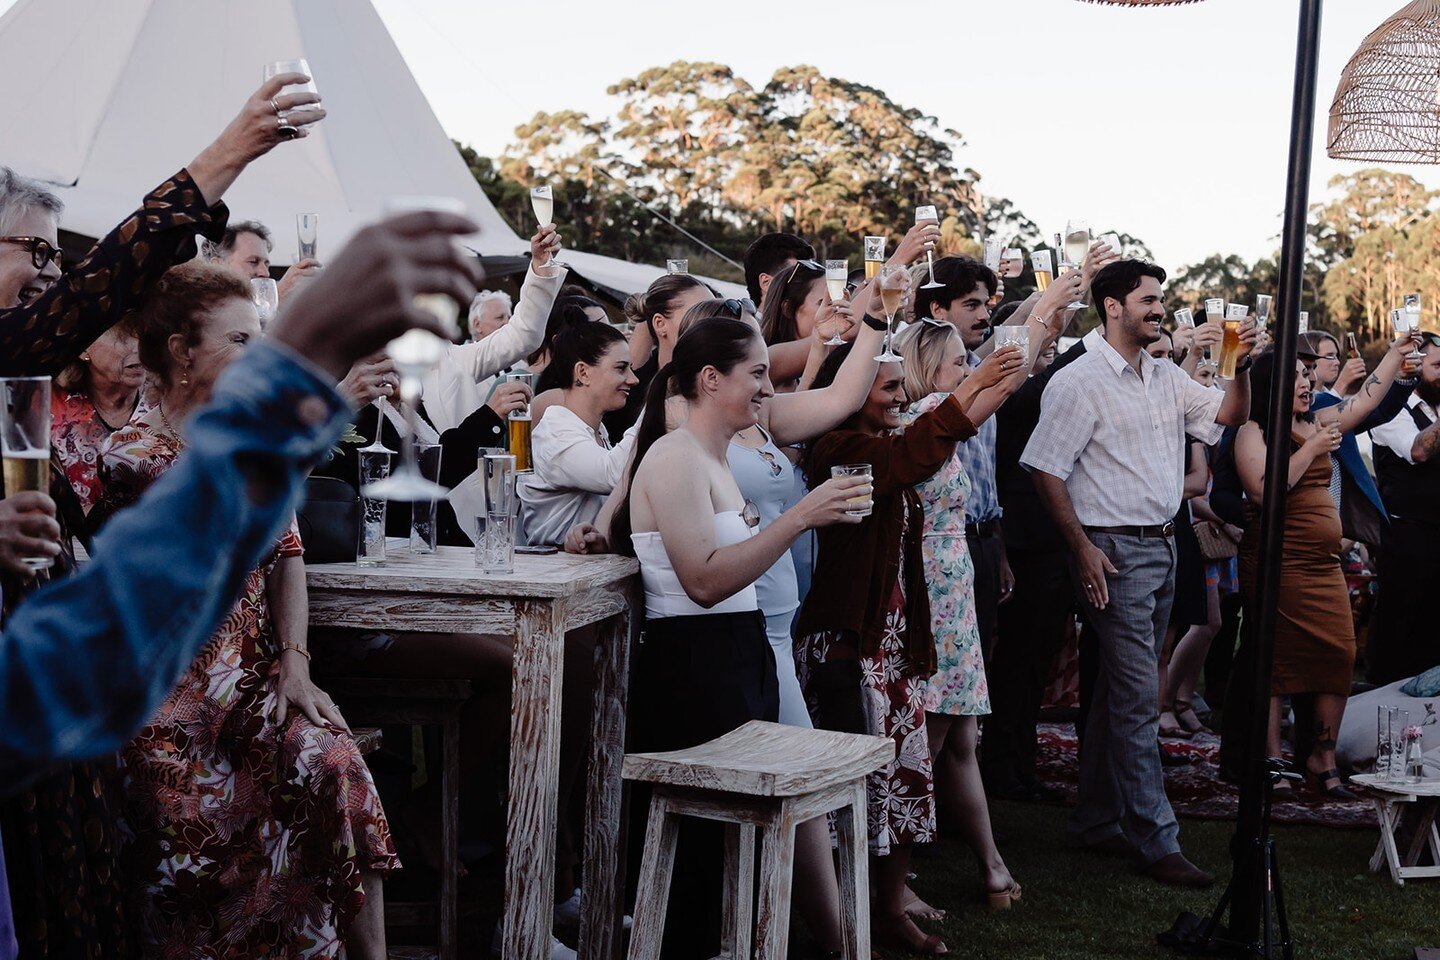 Exciting news - our new Tanah Marah Weddings website is now live! ✨

Head to the link in our bio to check it out or visit www.tanahmarahweddings.com.au 🤍

Cheers to our new website! 🥂

#tanahmarahweddings